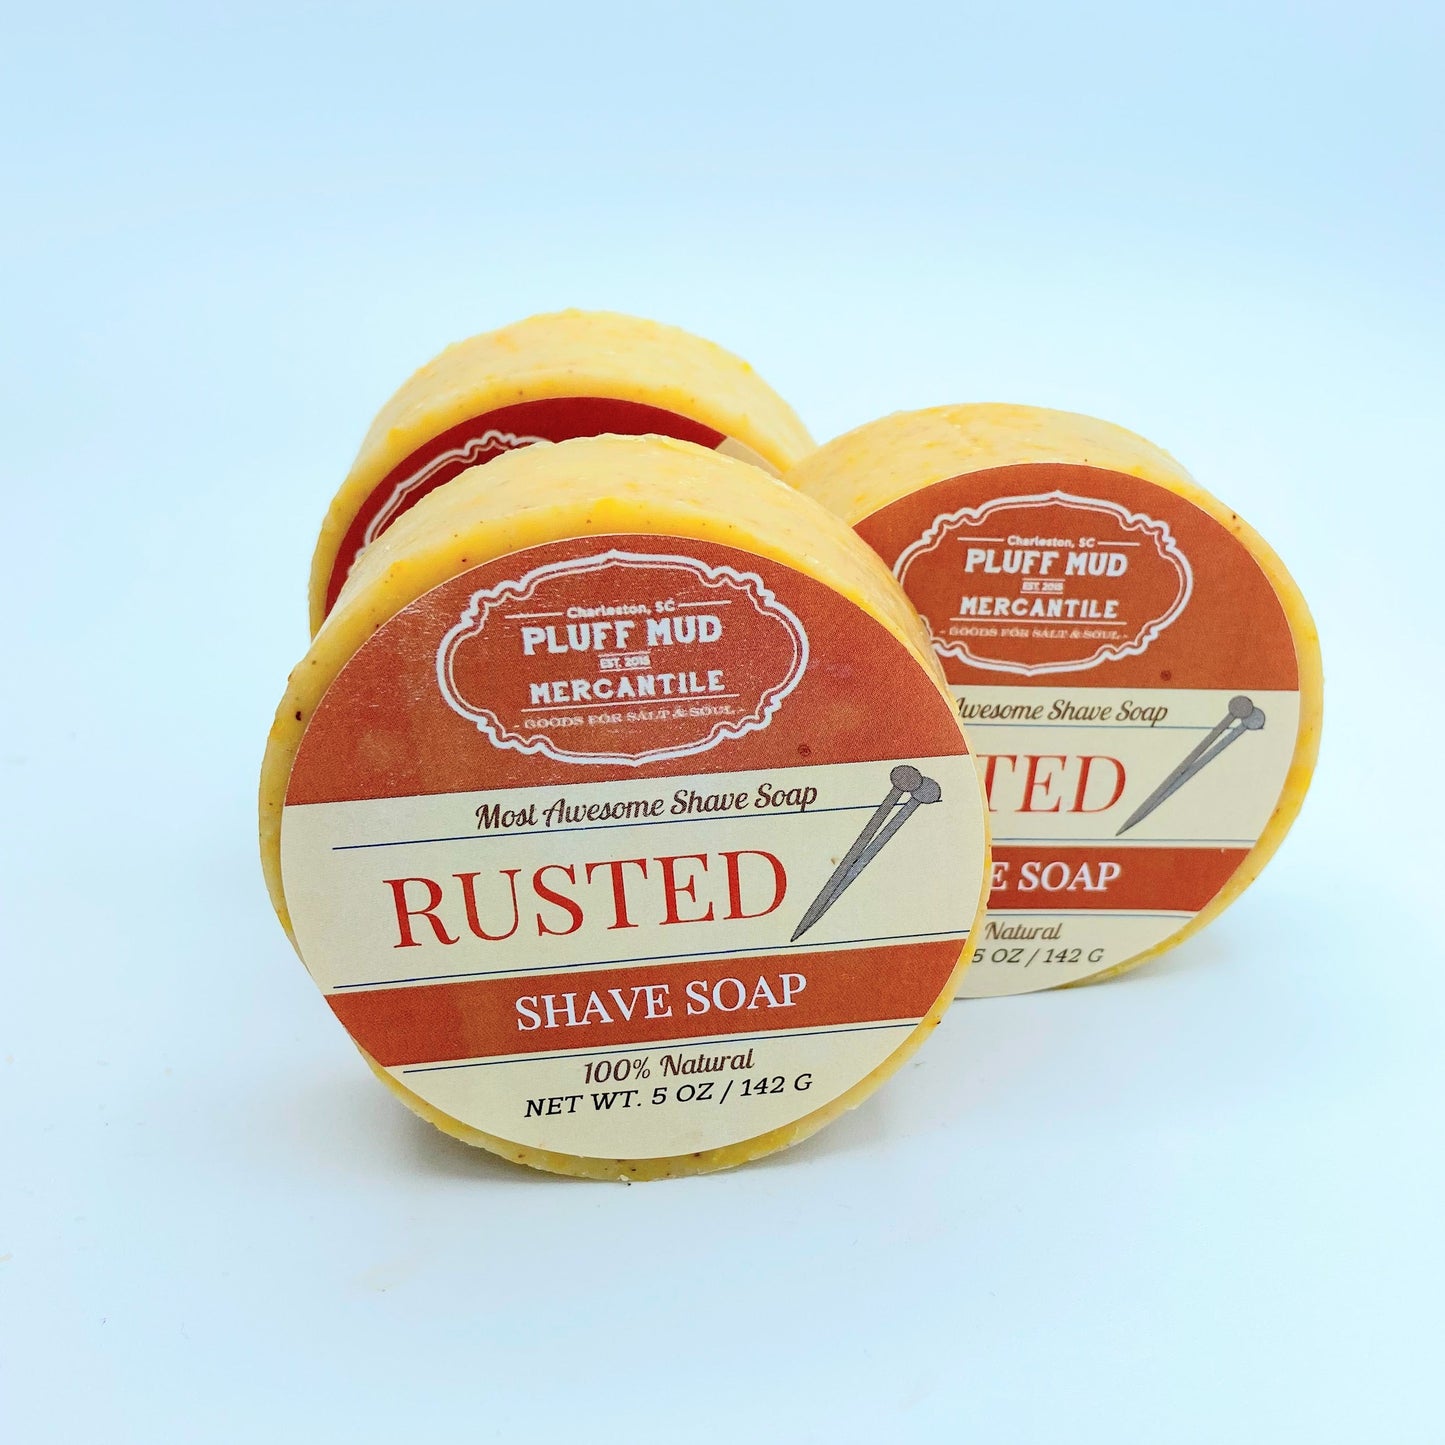 Rusted Shave Soap 5oz - Pluff Mud Mercantile